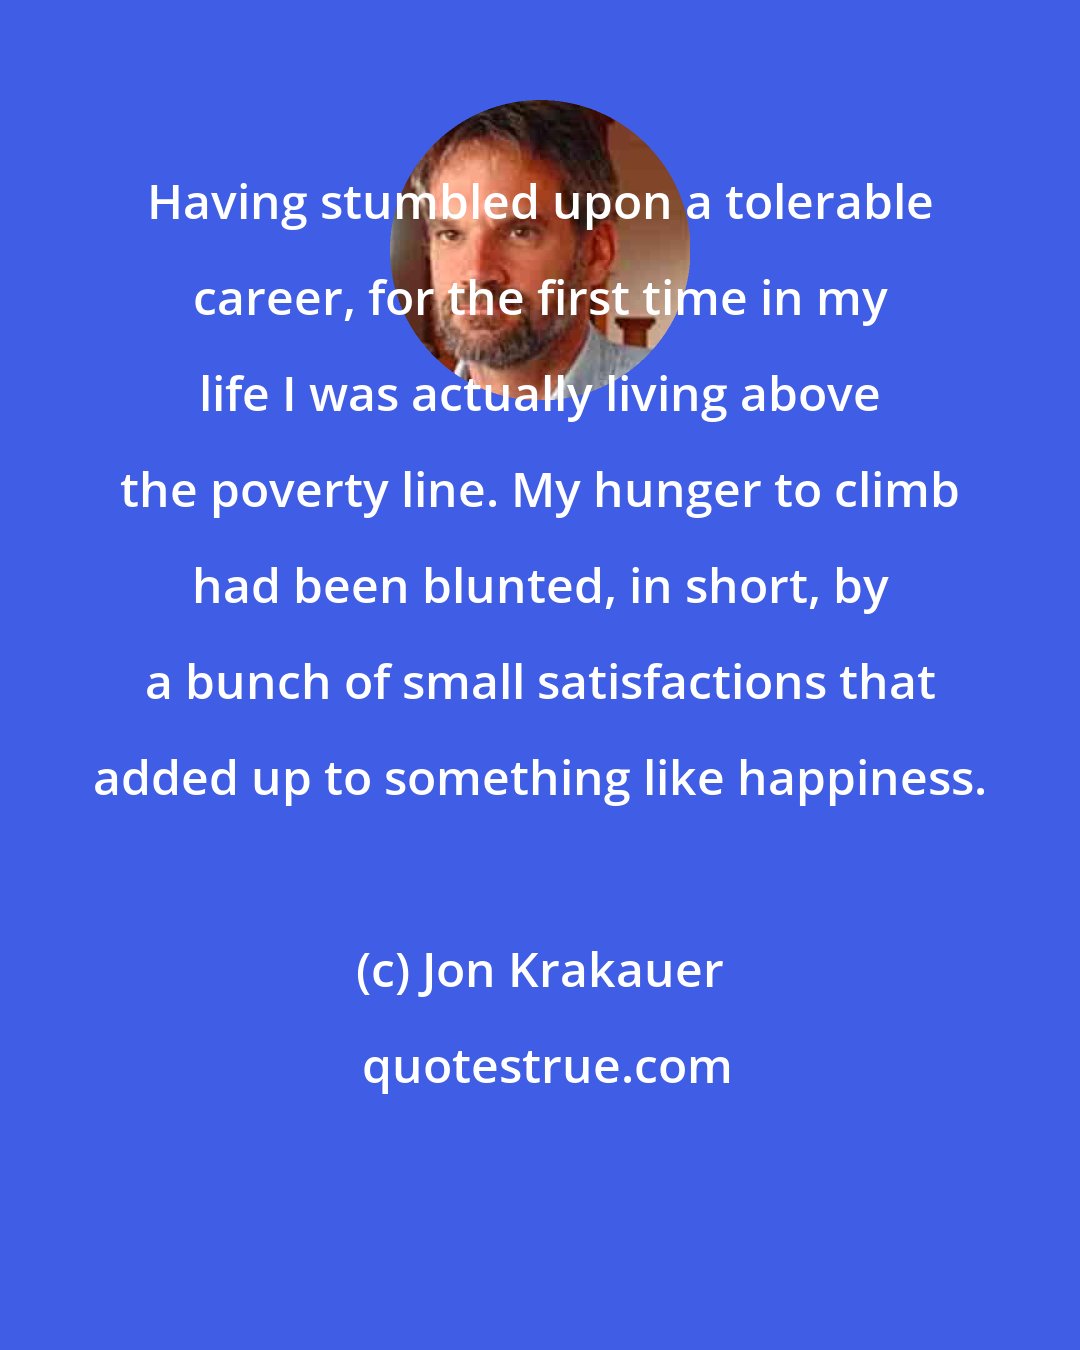 Jon Krakauer: Having stumbled upon a tolerable career, for the first time in my life I was actually living above the poverty line. My hunger to climb had been blunted, in short, by a bunch of small satisfactions that added up to something like happiness.